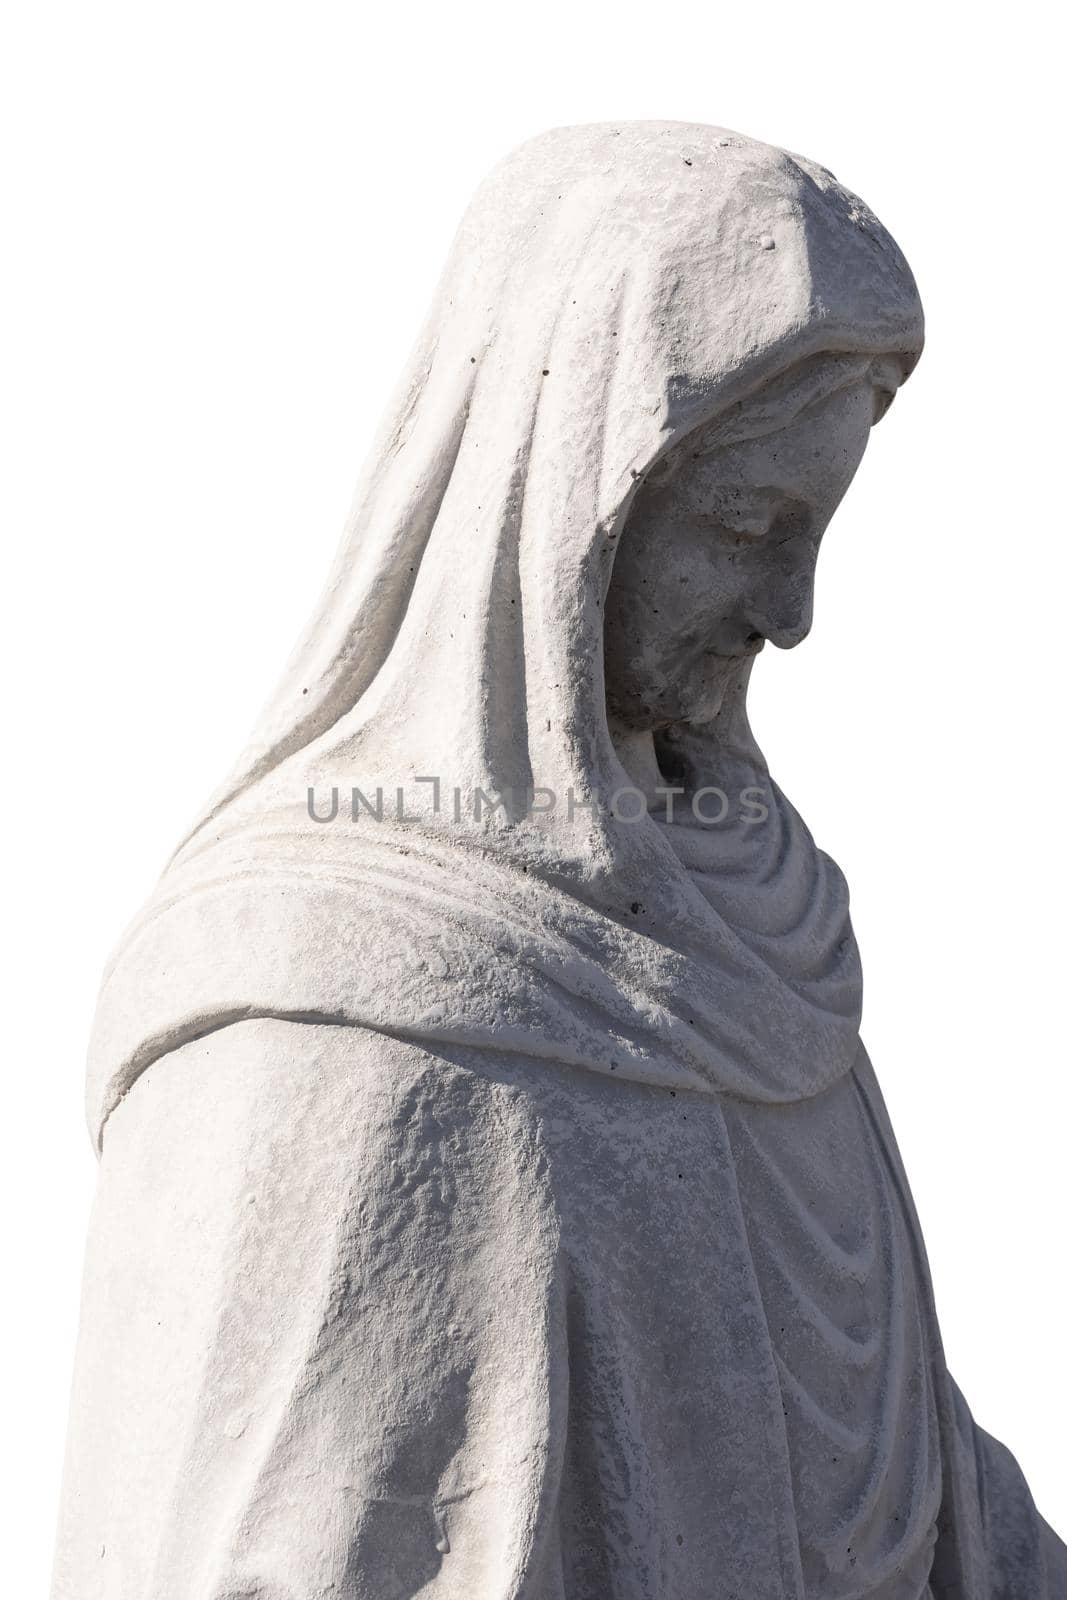 Close up side view of stone sculpture of virgin mary on white background. art and classical style romantic figurative stone sculpture.